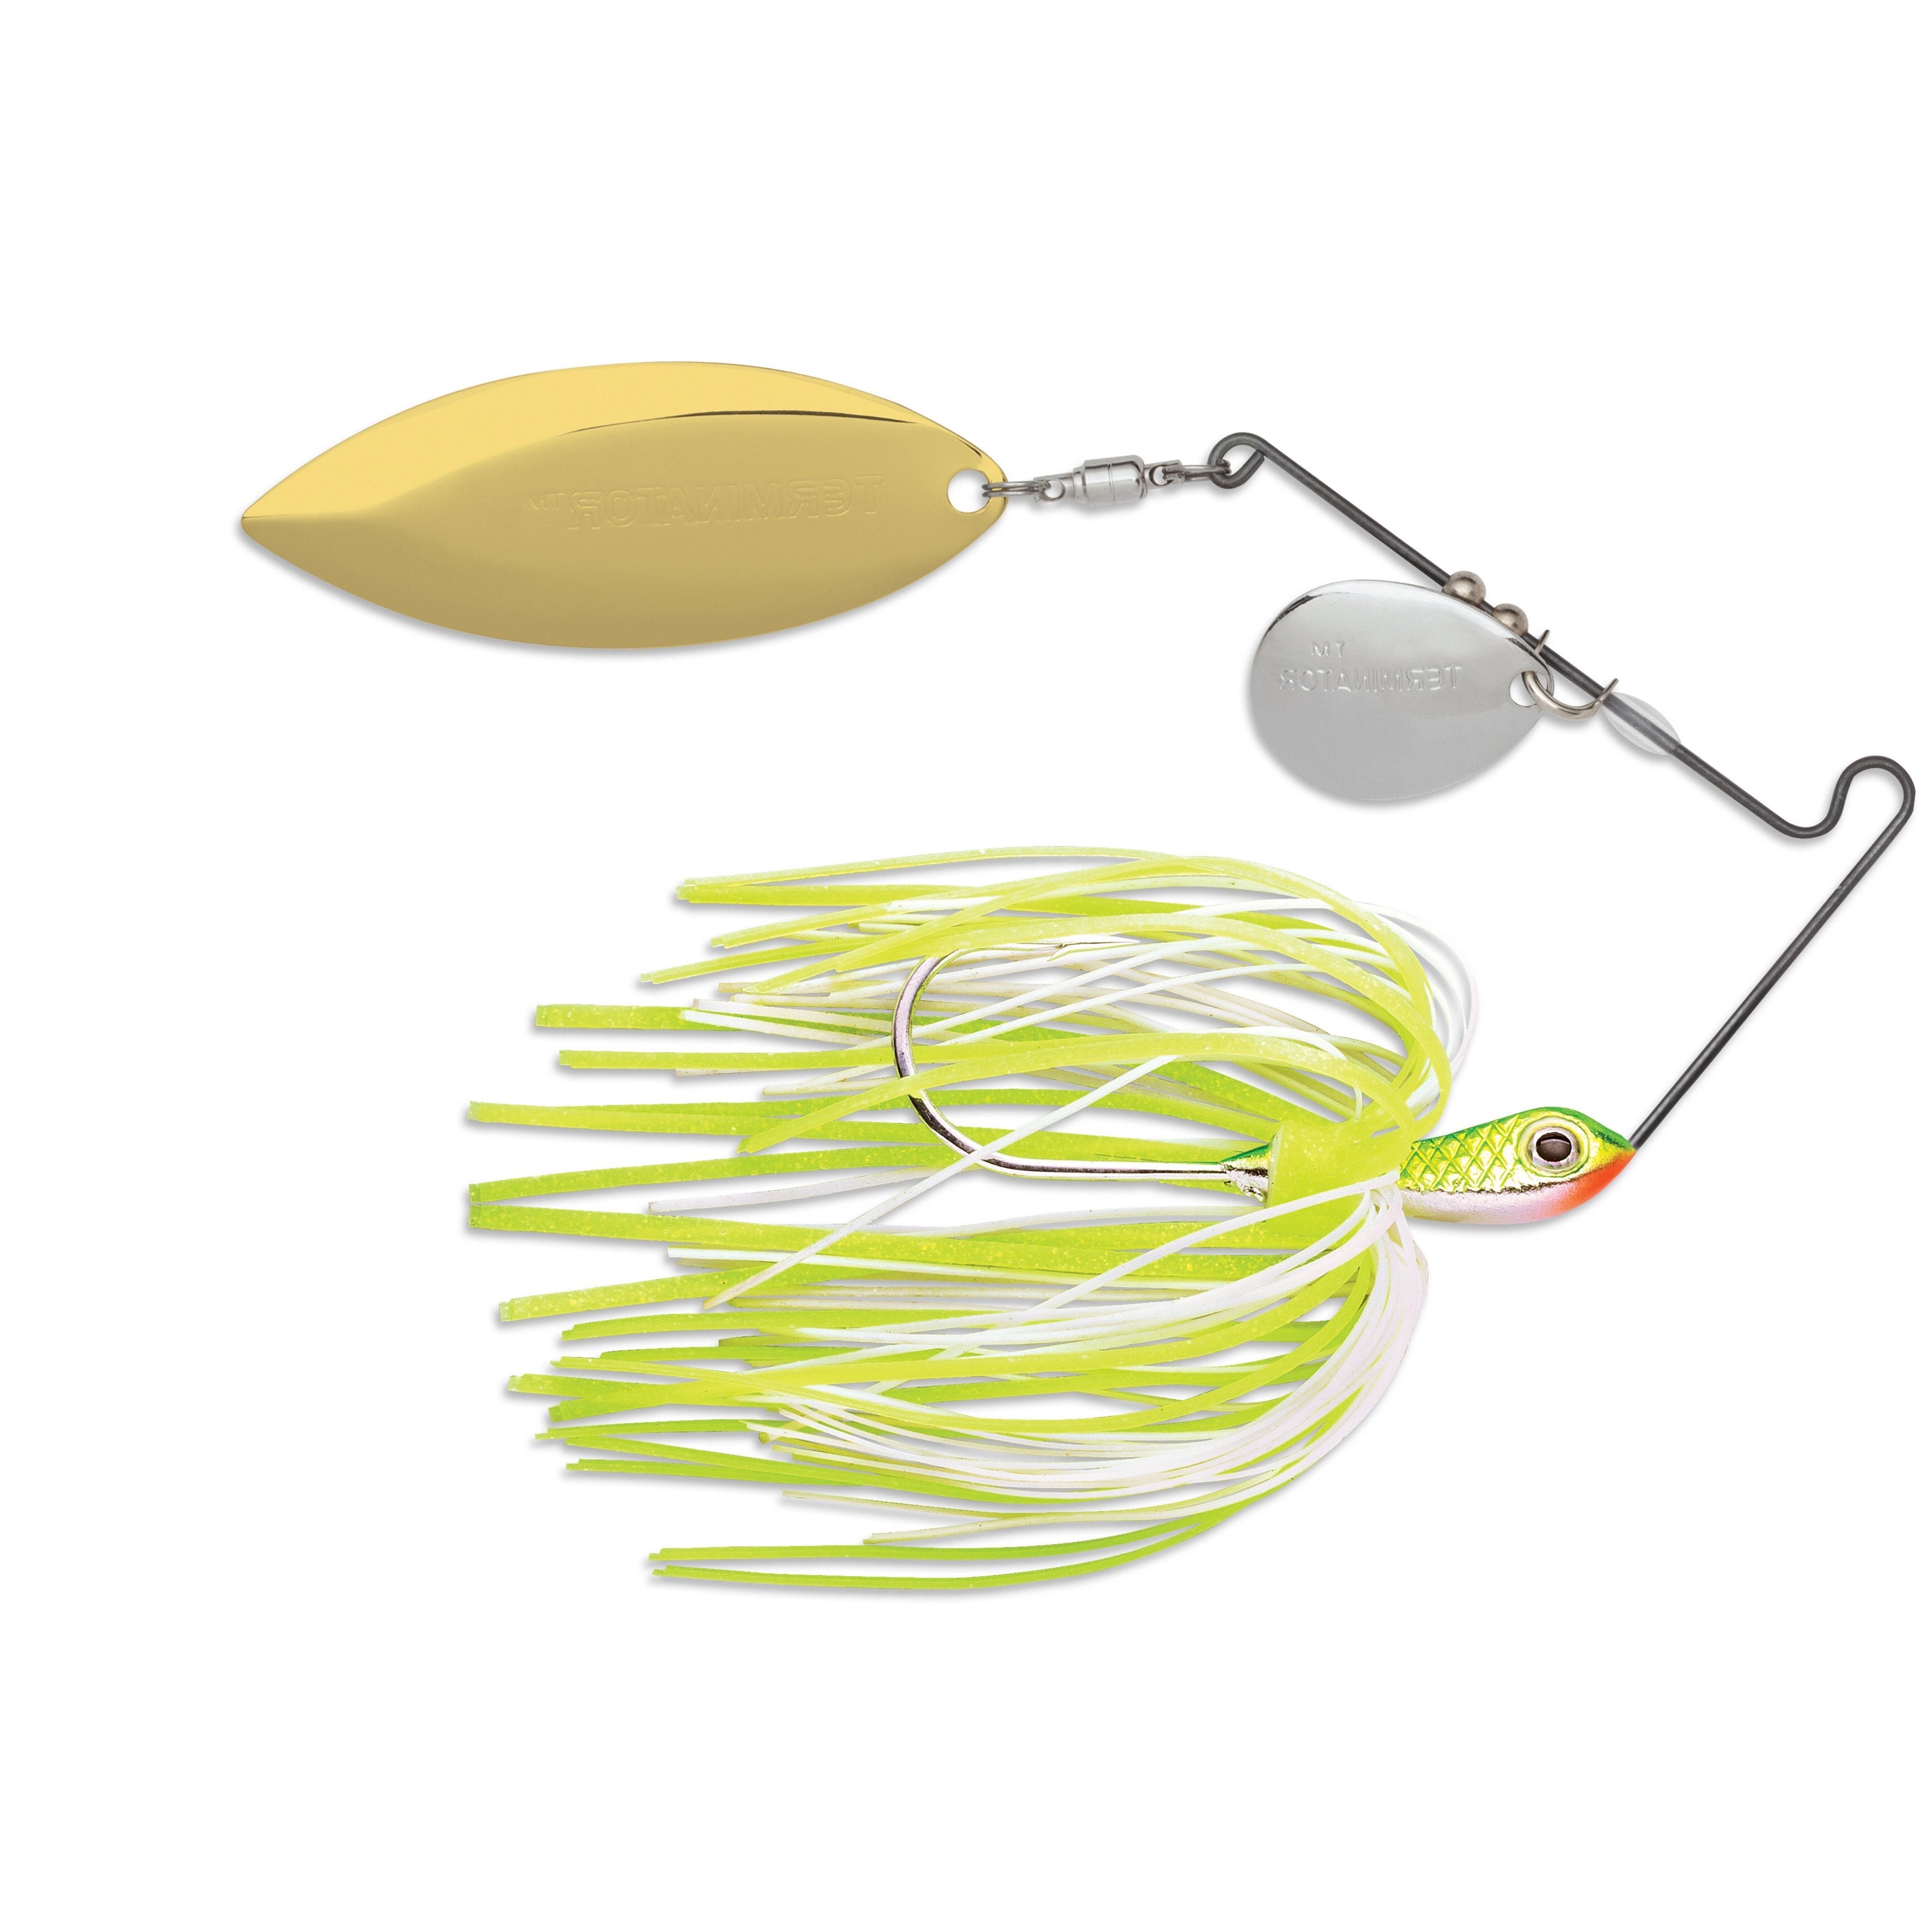 Terminator Pro Series Spinnerbaits 3/8 oz. Chartreuse and Wh